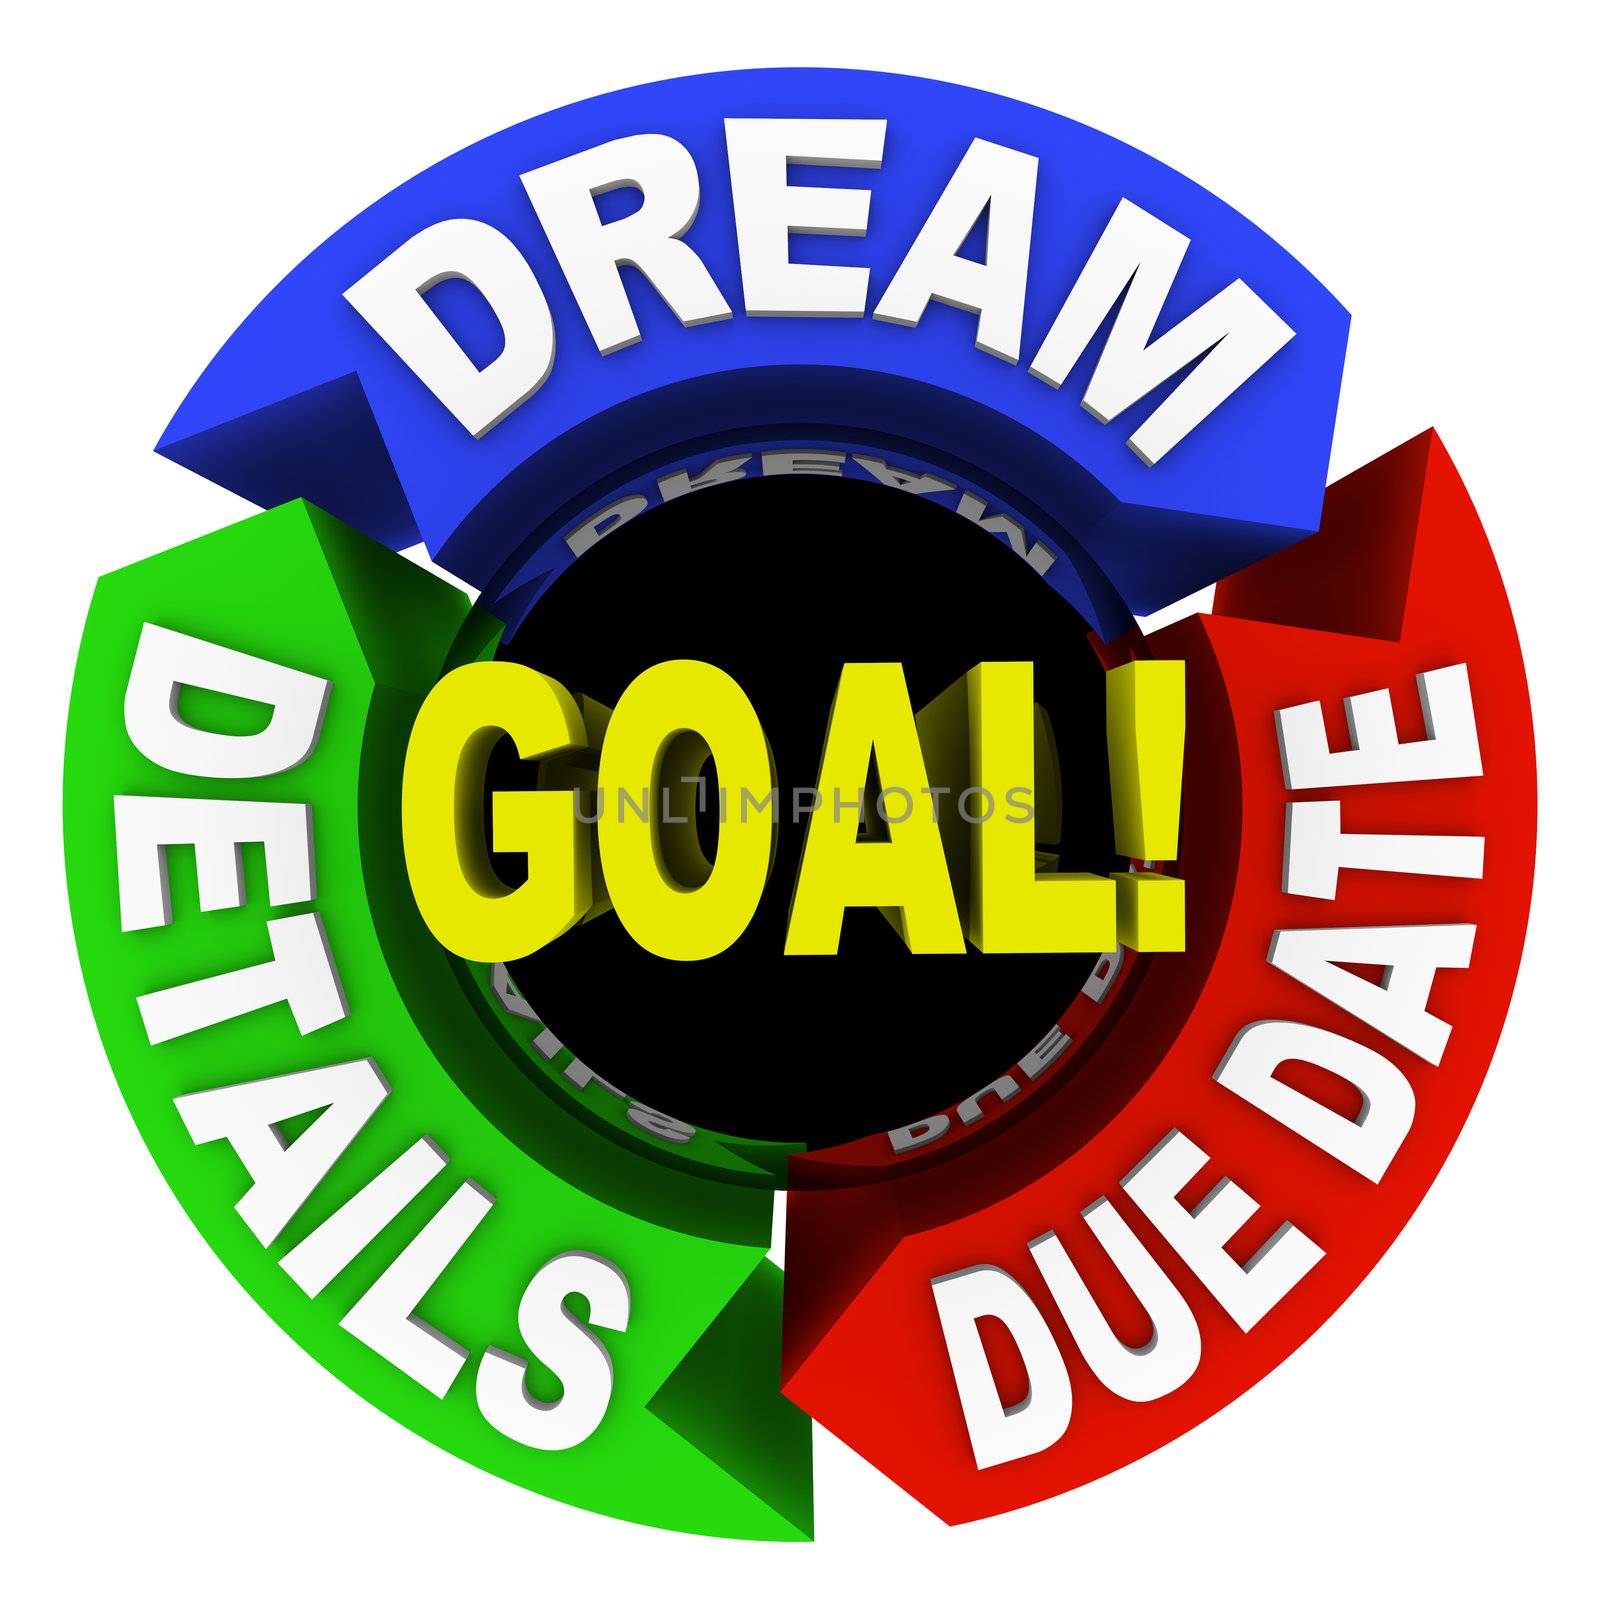 A diagram of words showing how to succeed in reaching a goal - dream, details and due date